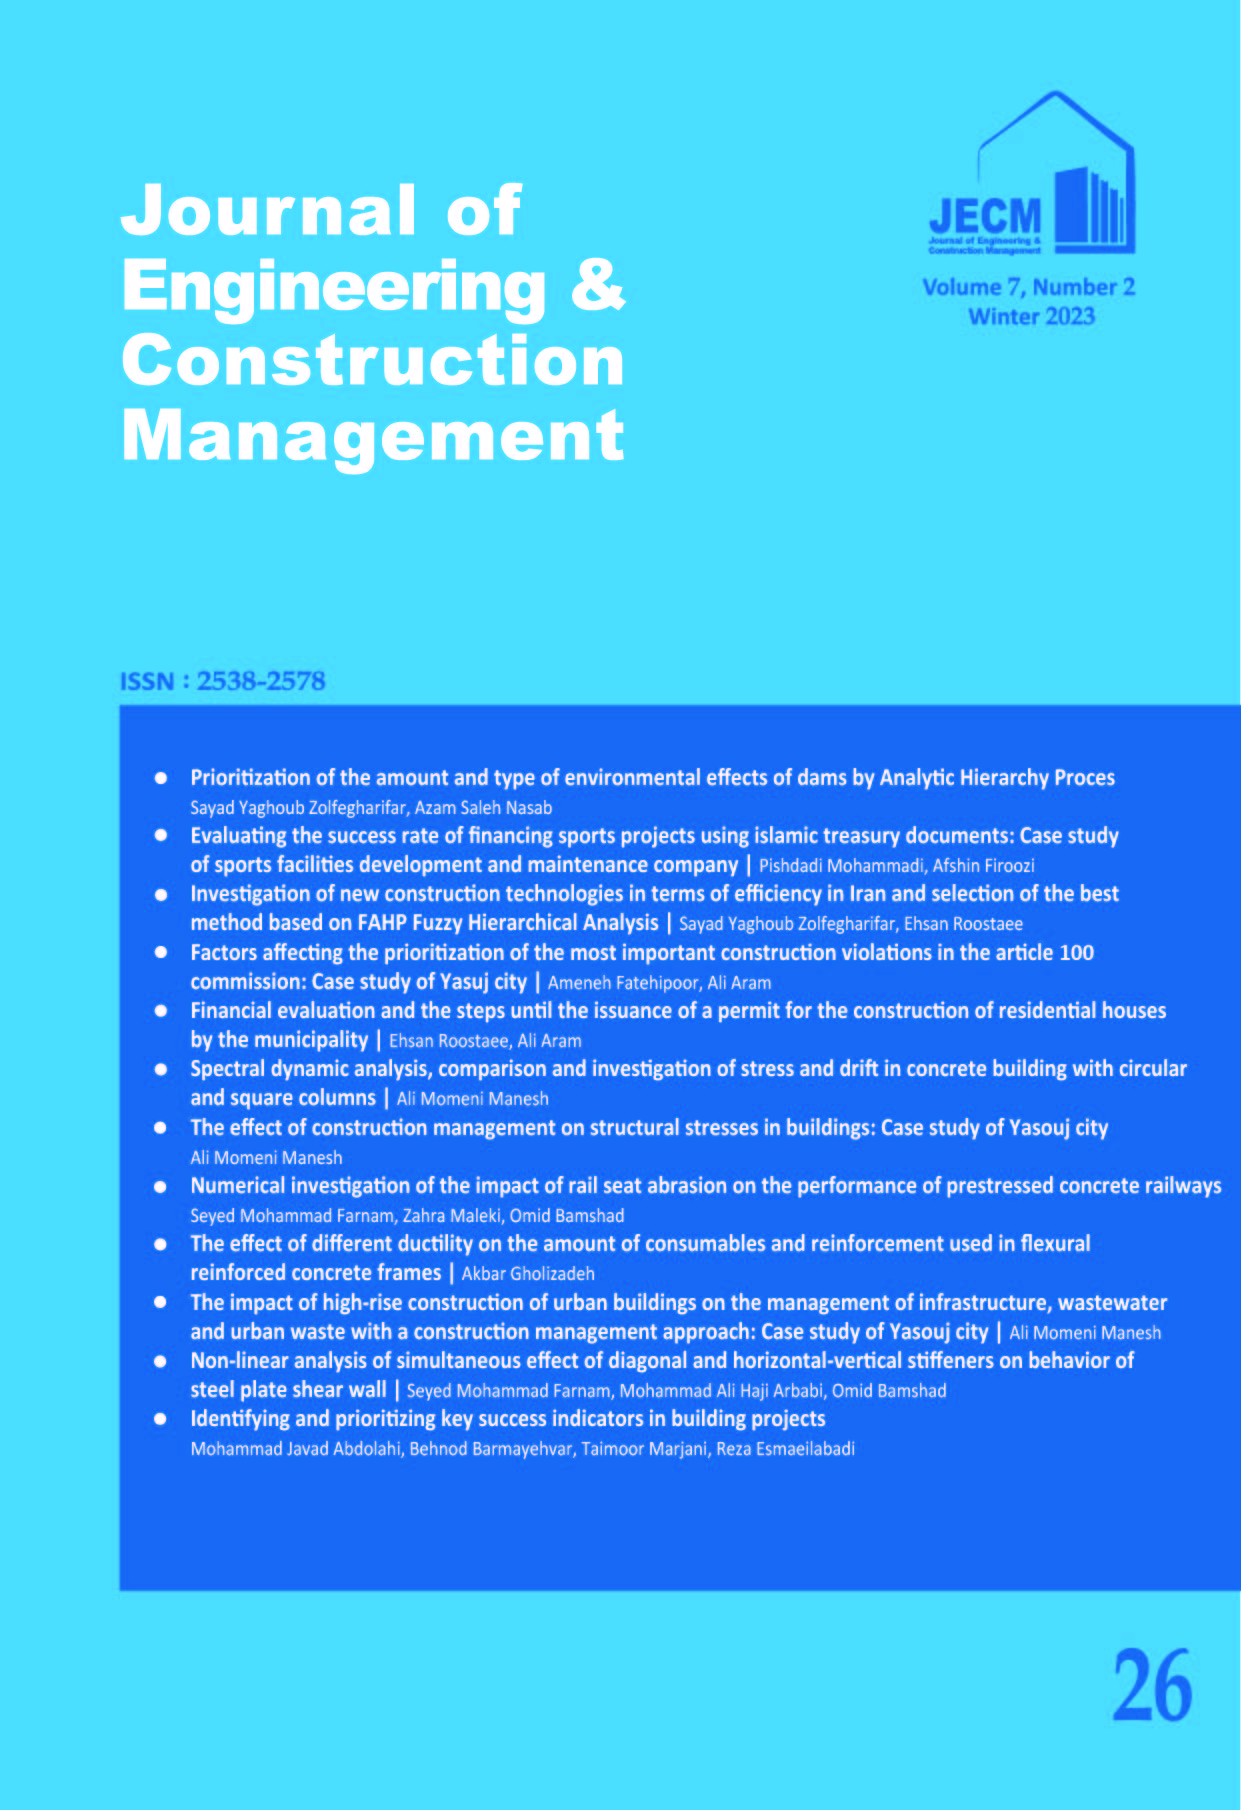 Journal of Engineering & Construction Management